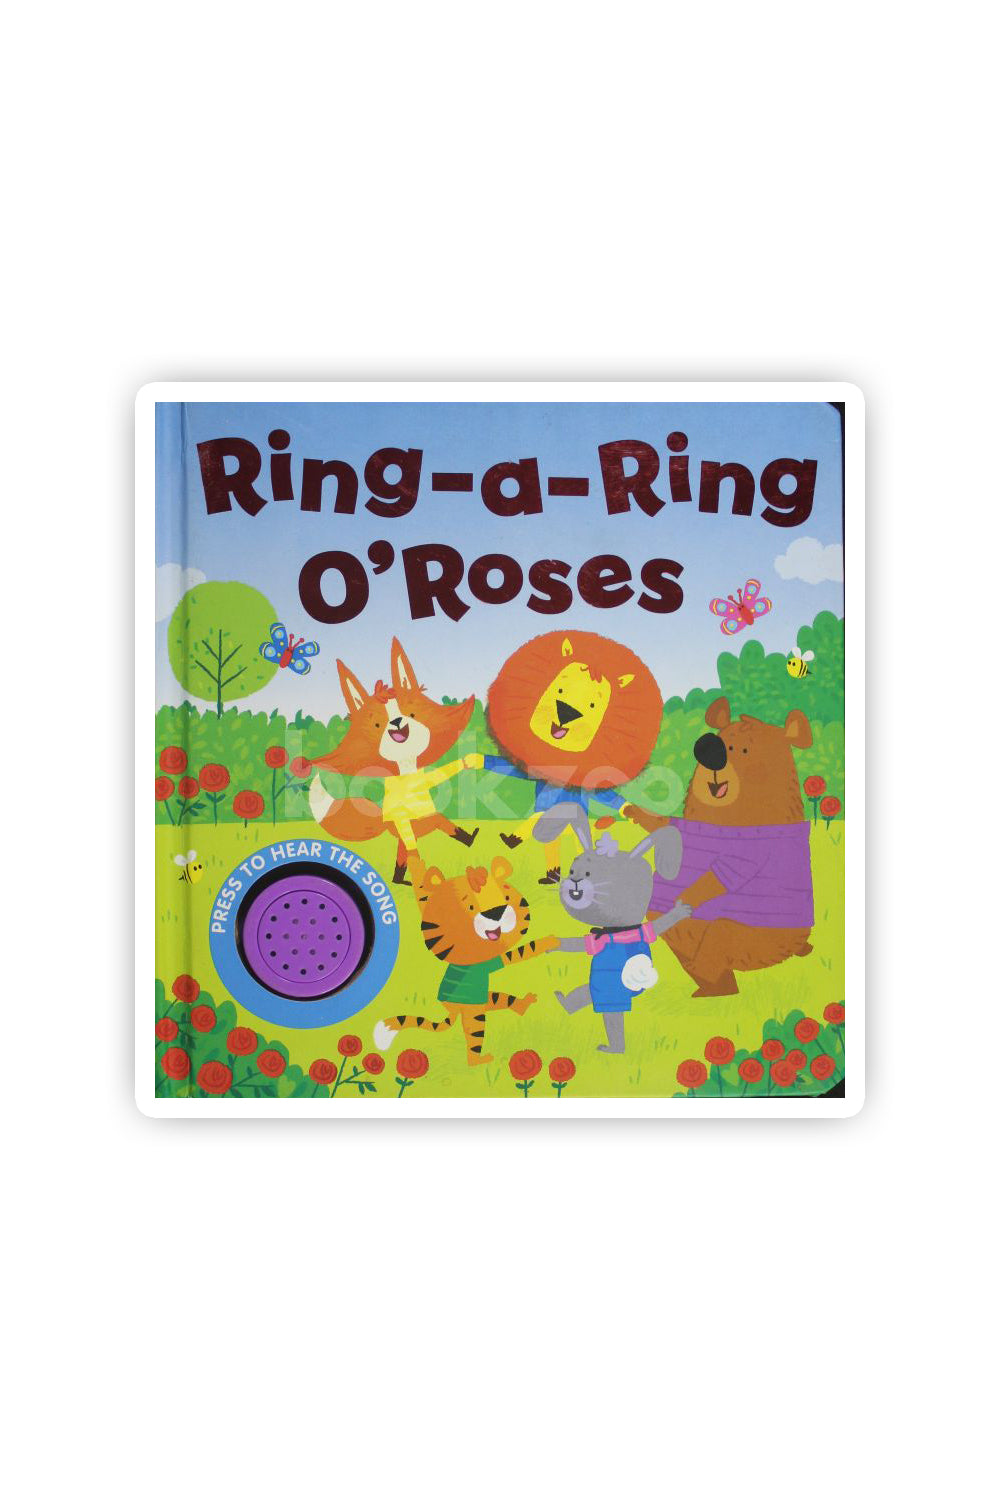 Buy Ring A Ring O' Roses by Brita Granstrom at Online bookstore bookzoo.in  — Bookzoo.in